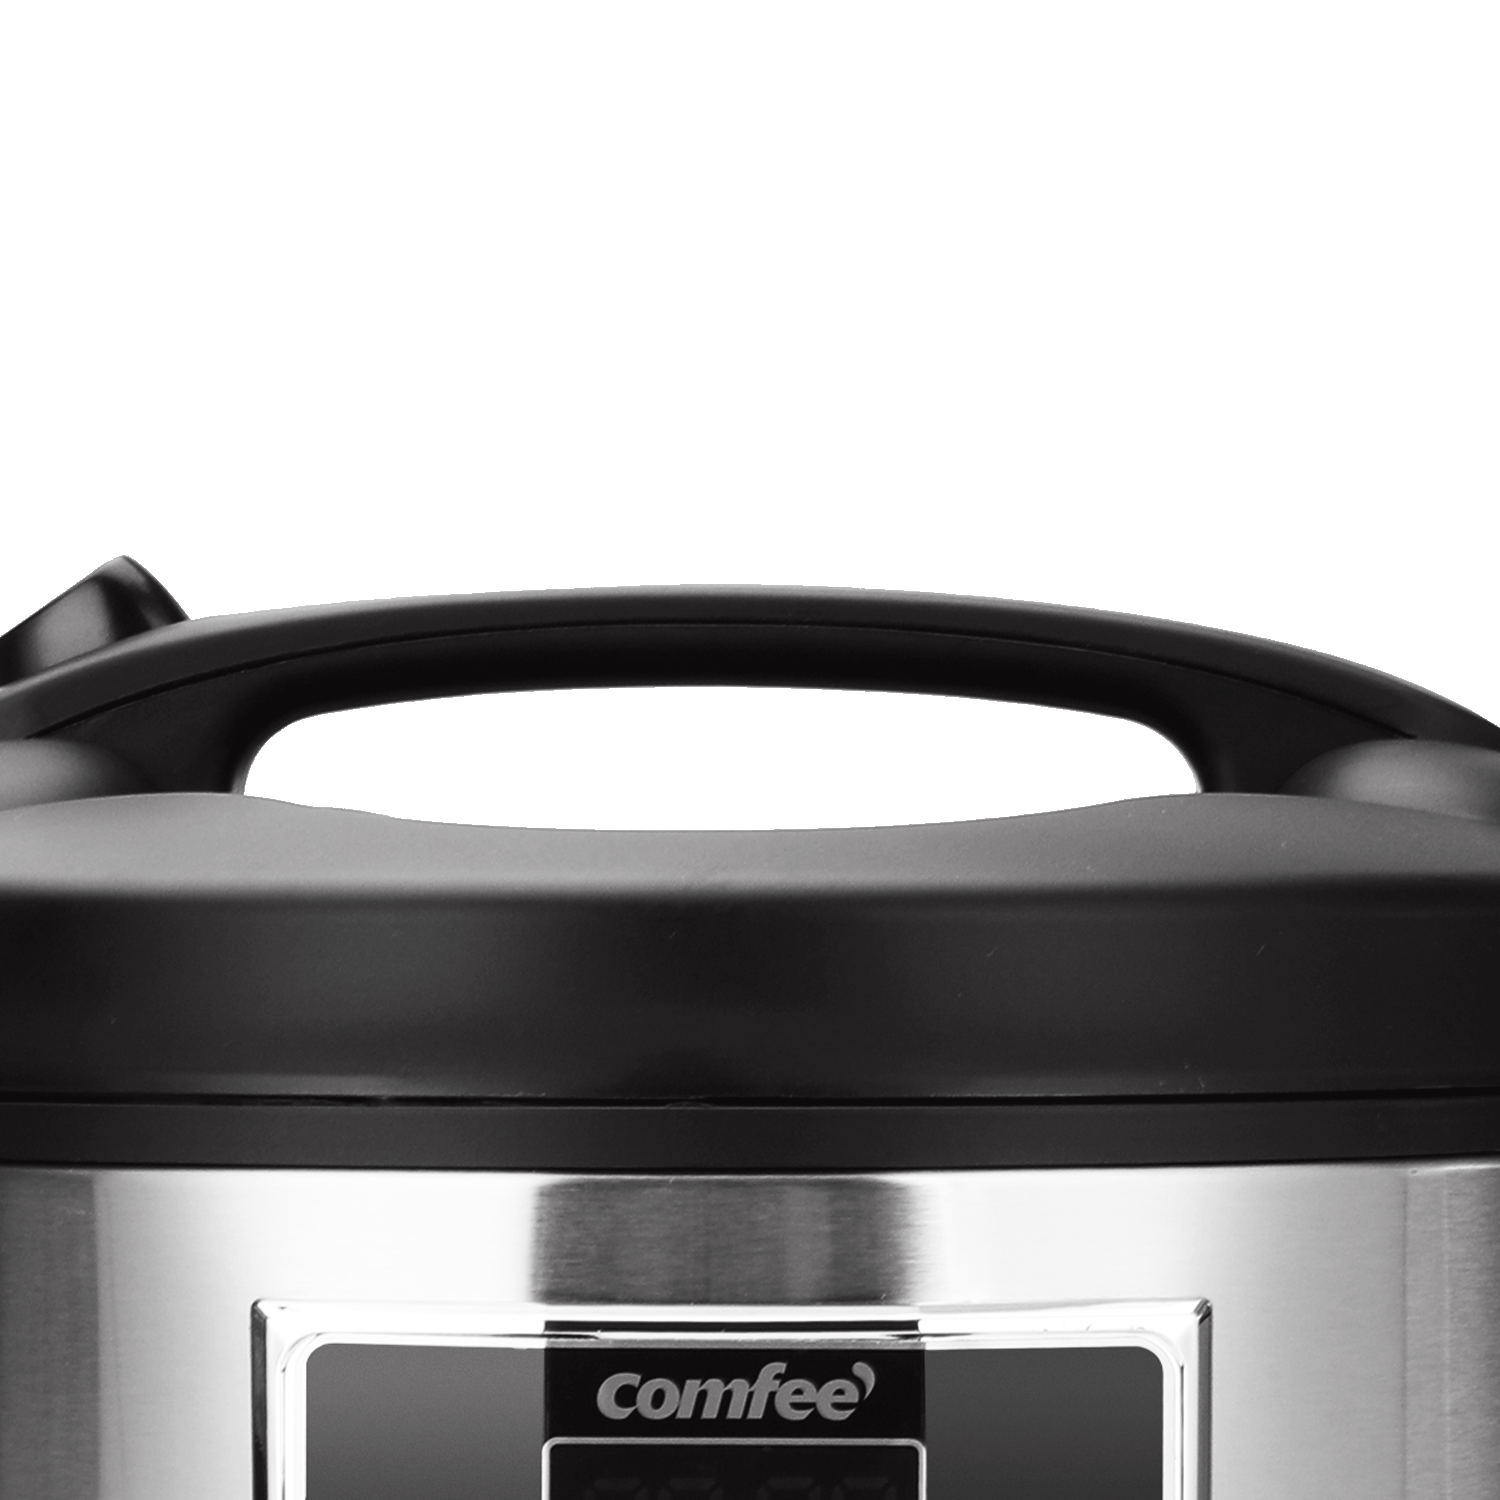 All-in-1 Multi Cooker, Rice cooker MB-M25 – Global